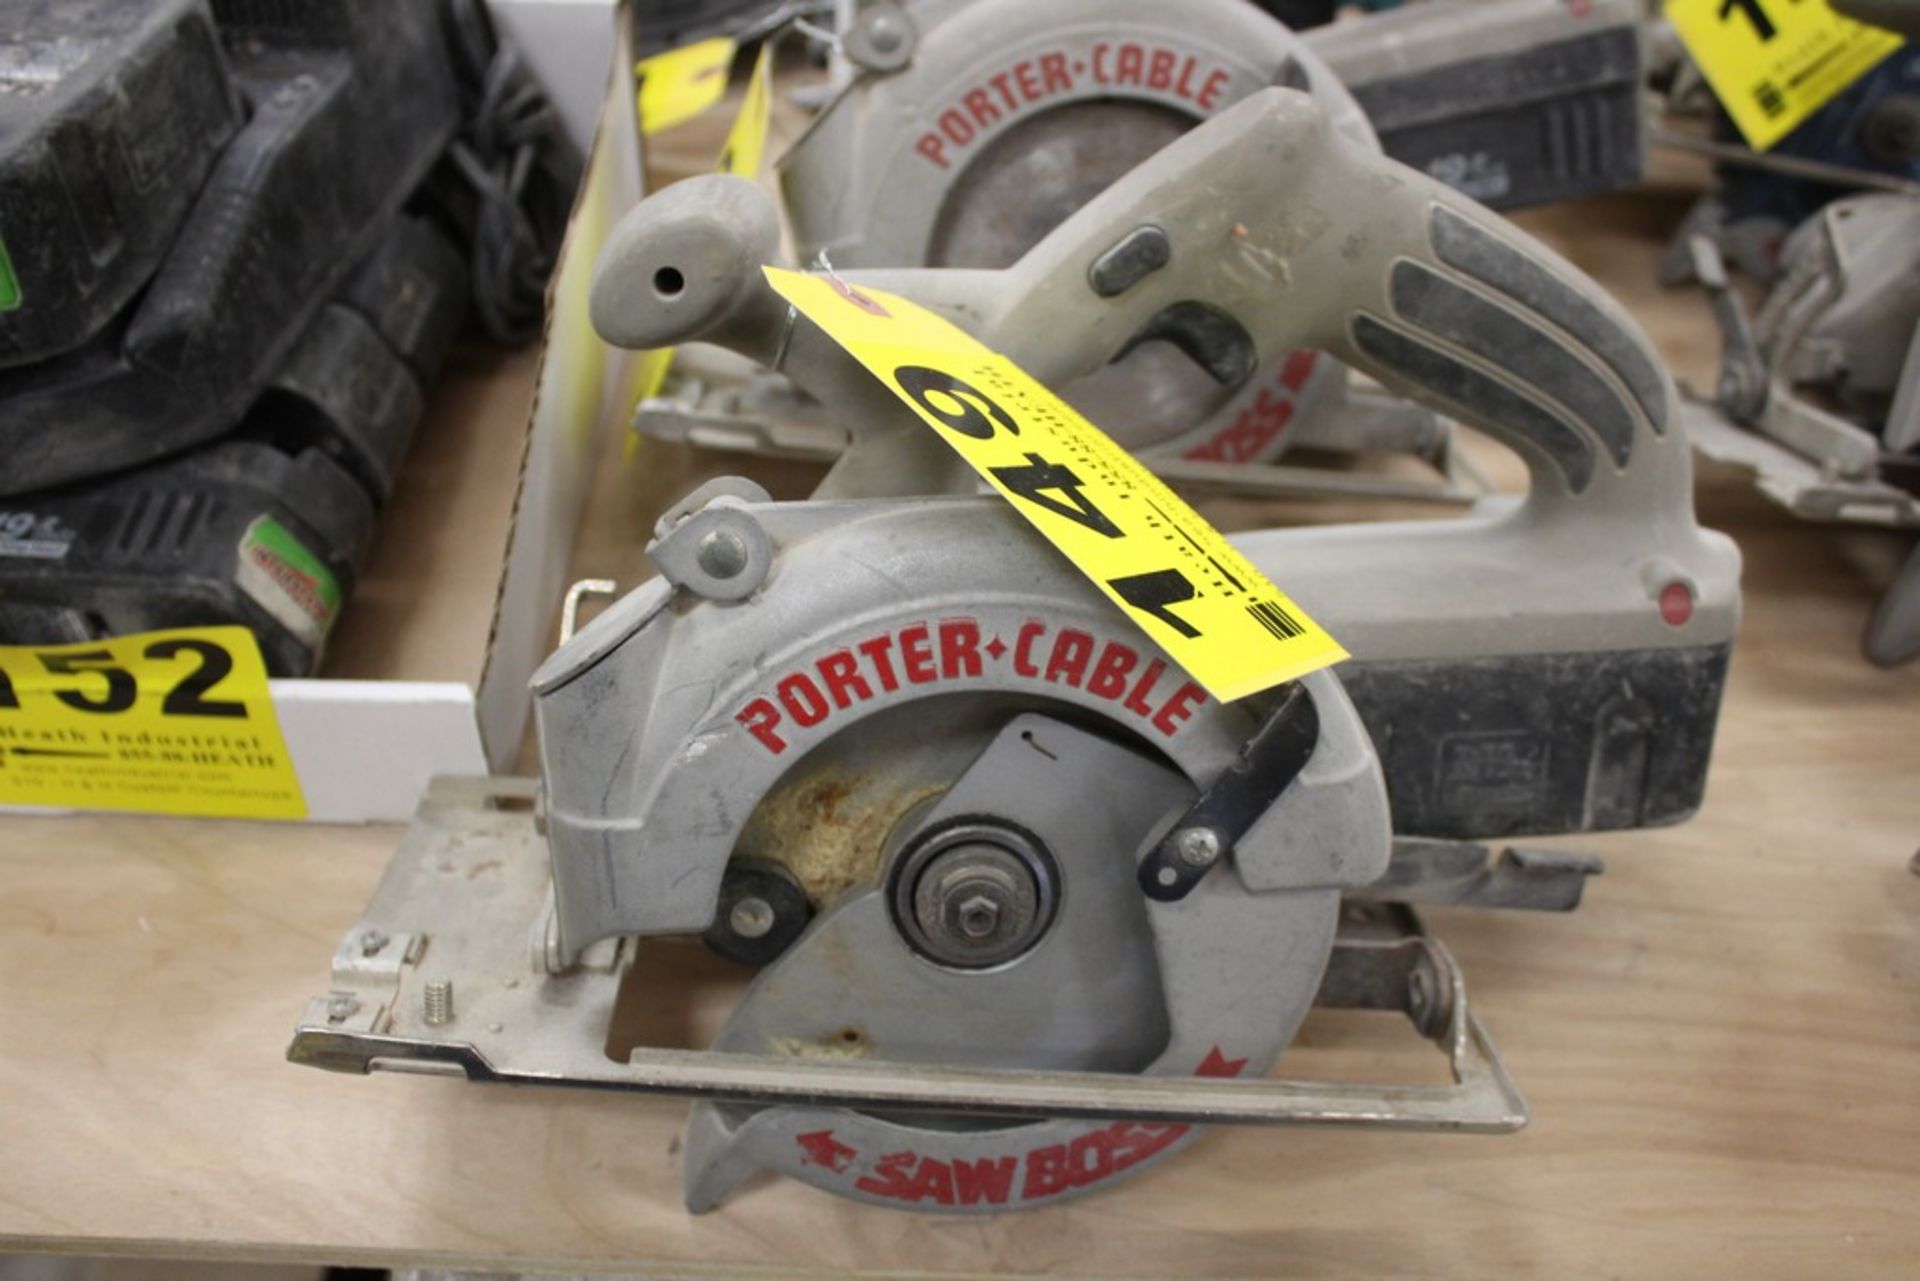 PORTER CABLE MODEL 845 BATTERY OPERATED CIRCULAR SAW 19.2 VOLT - Image 2 of 2